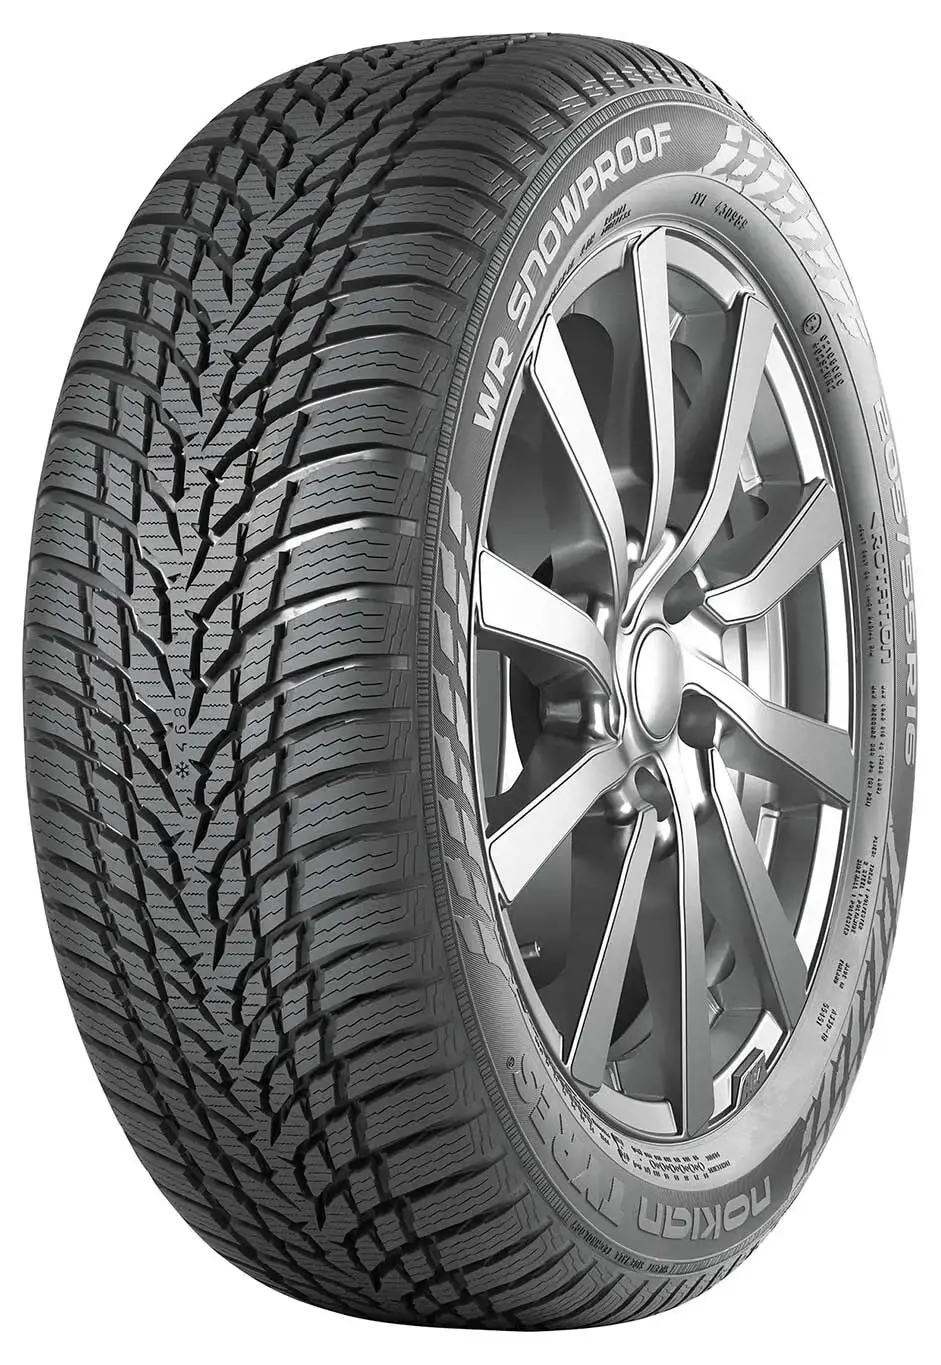 WR 225/50 98H Tyres R17 Nokian Snowproof